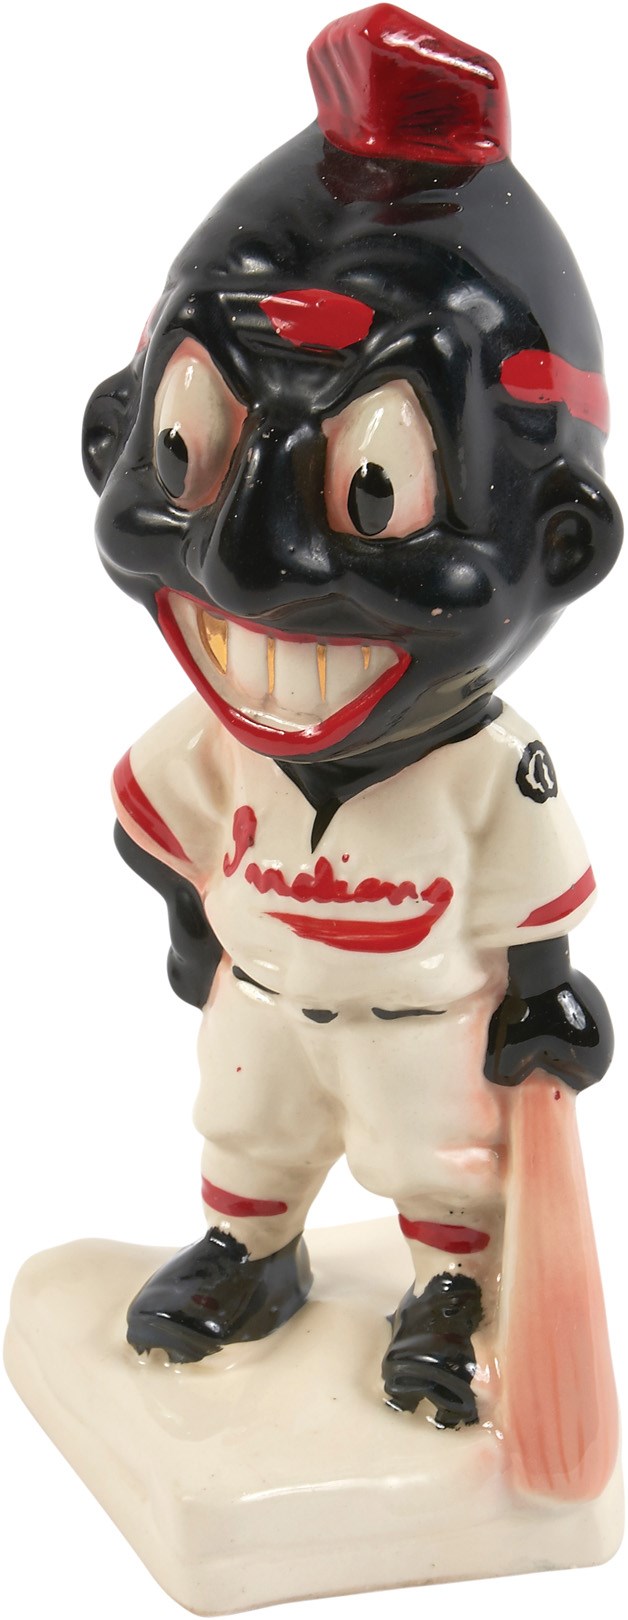 Baseball Memorabilia - Circa 1947 Larry Doby "Black Face" Stanford Pottery Bank (One-of-a-Kind)